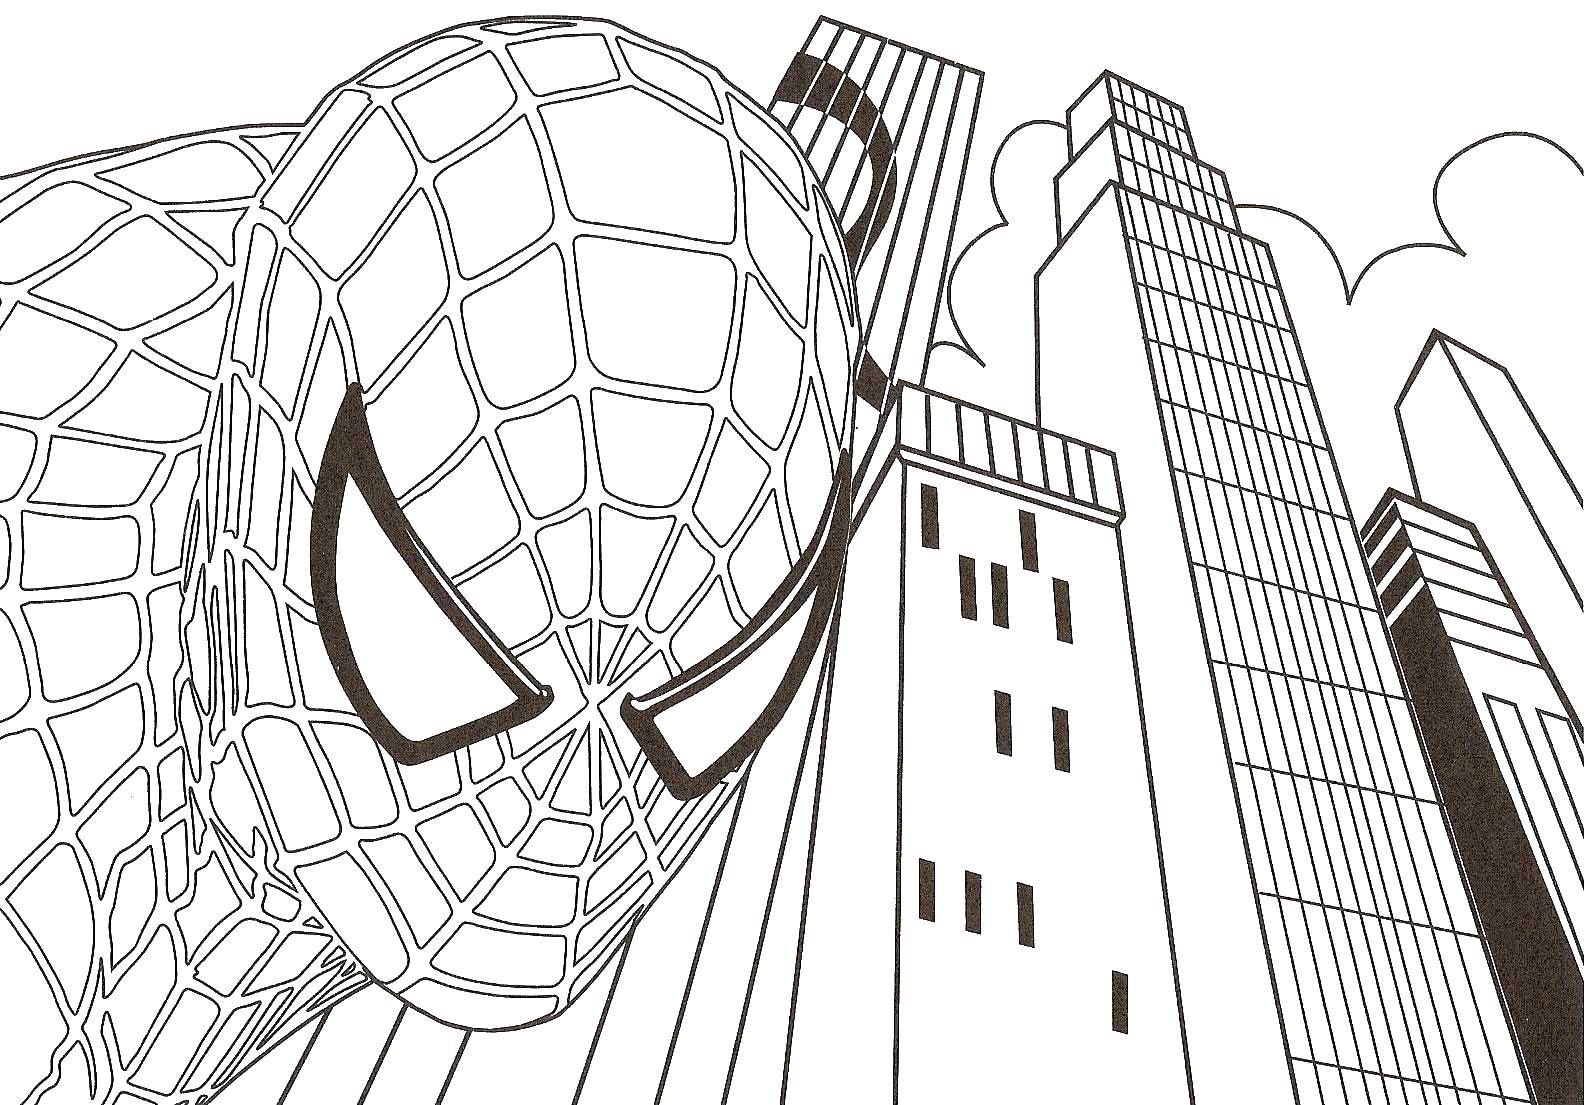 Coloring Spider-man. Category spider man. Tags:  spider man, superhero.